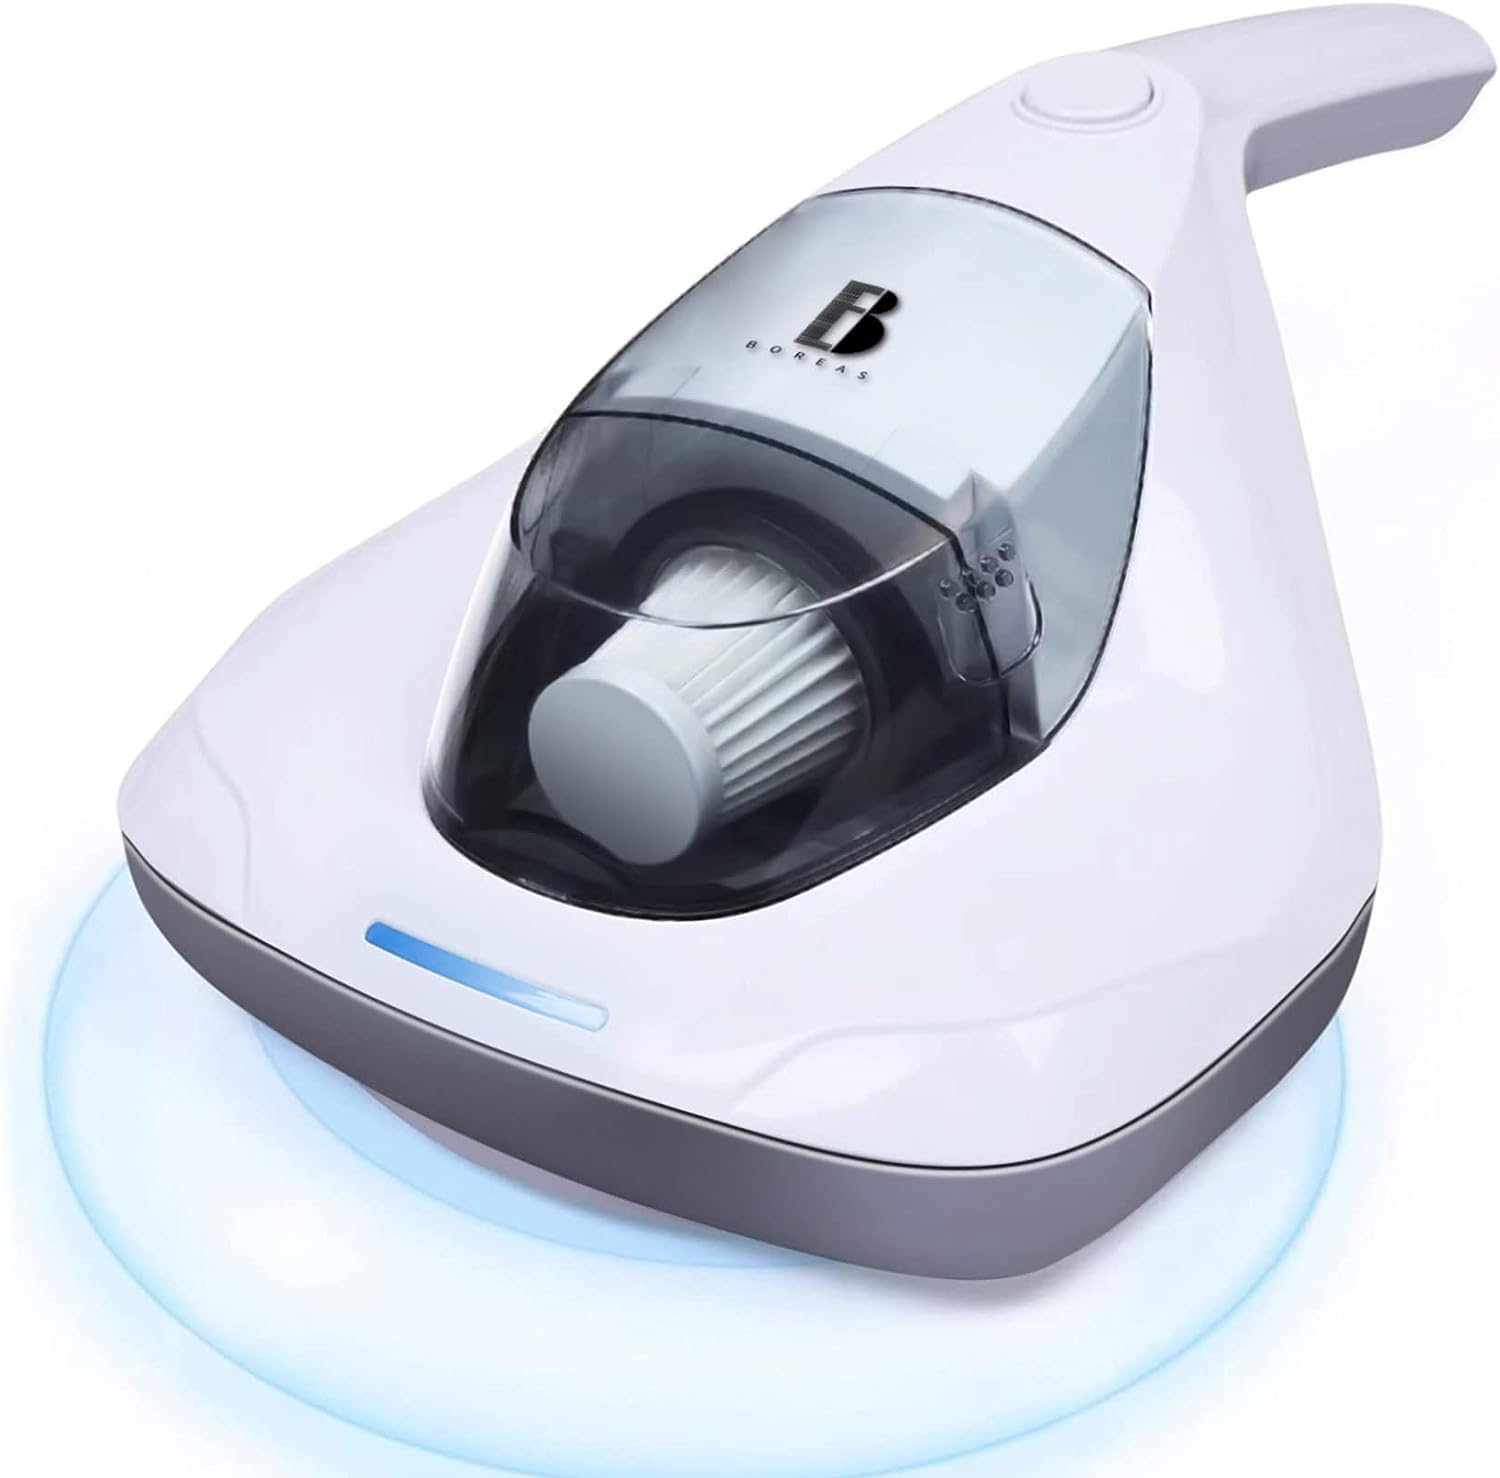 Boreas Handheld Vacuum Cleaner Review: Powerful Solution for Allergens and Mites